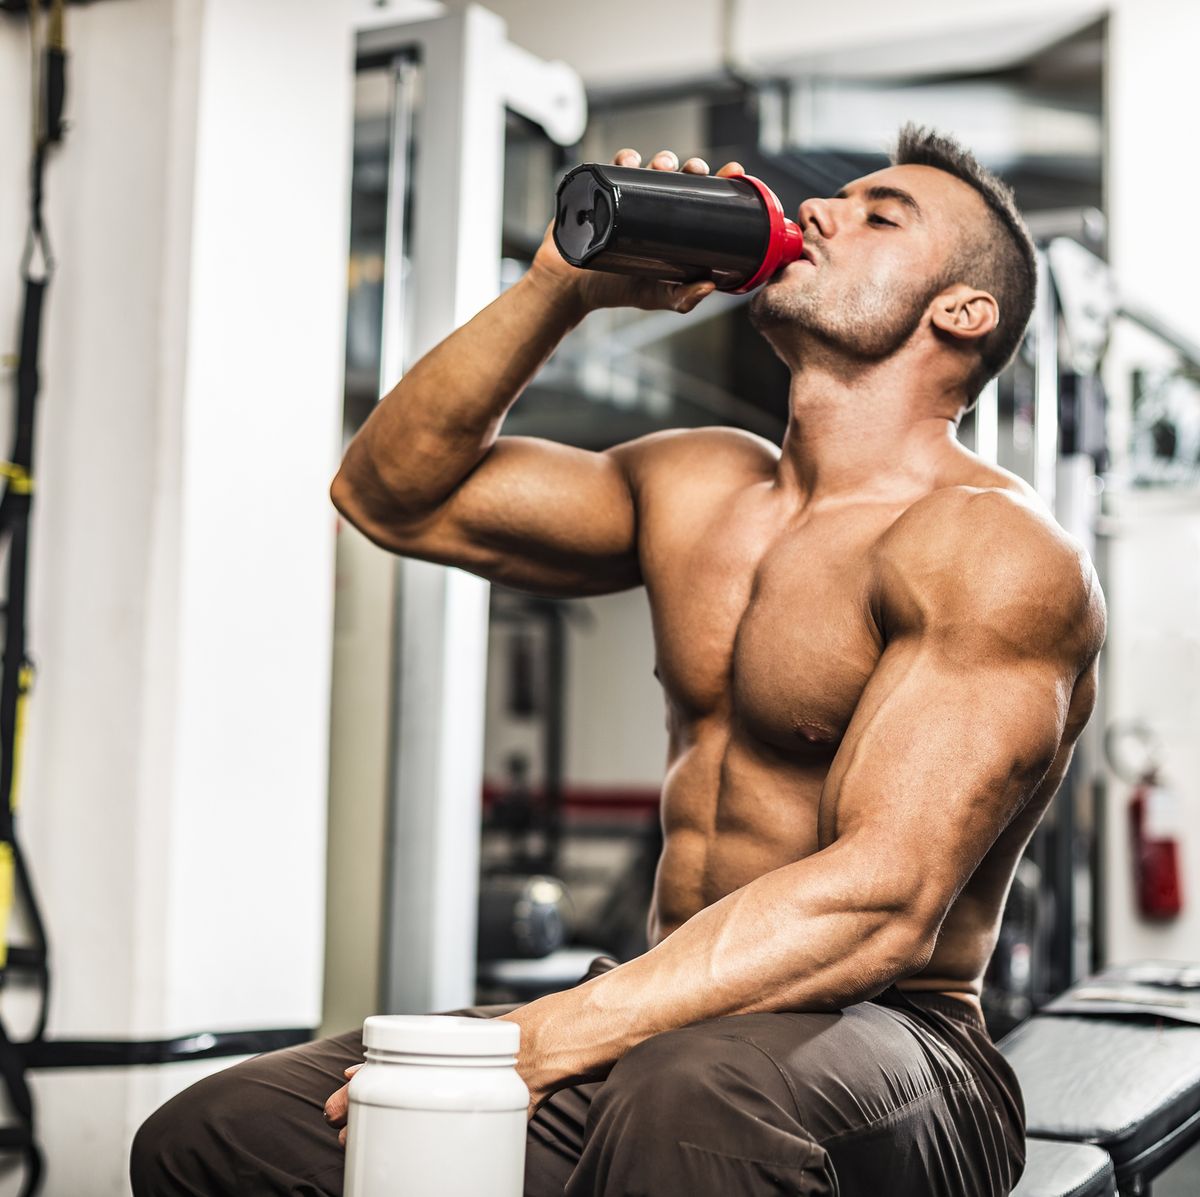 Here's How To Properly Bulk And Gain Muscle Mass